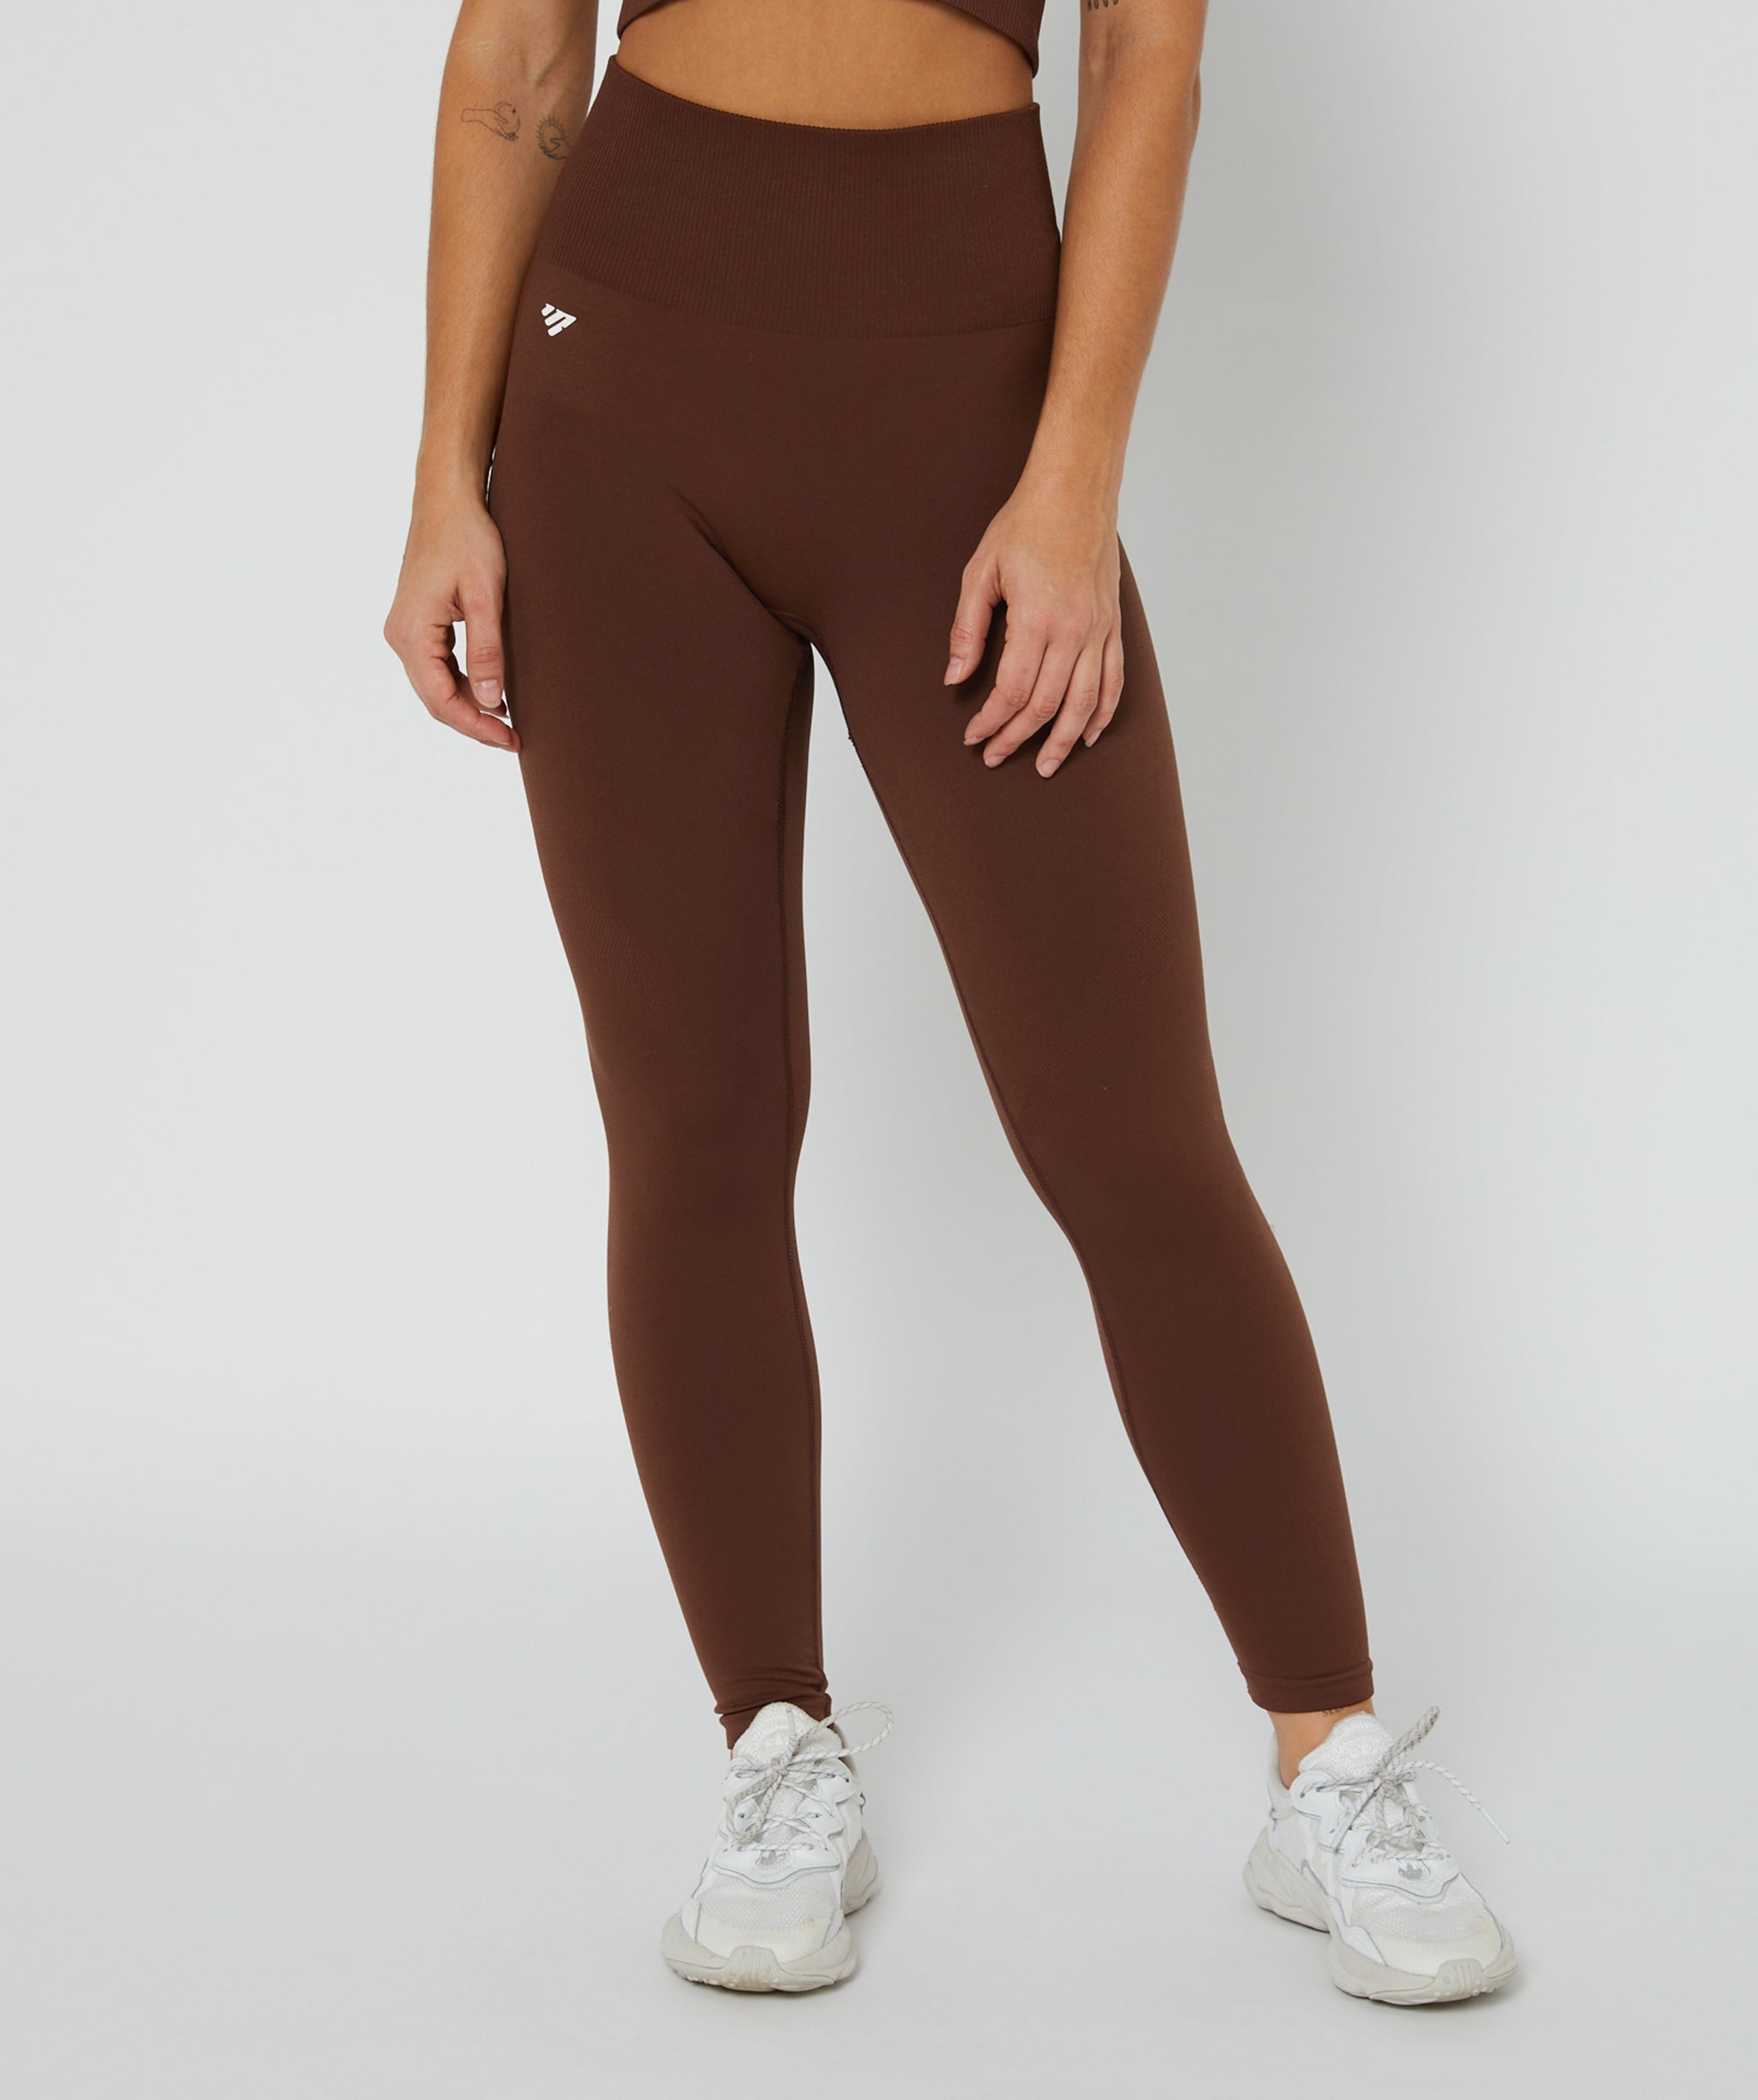 Luxesoft Pocket Full Length Tights